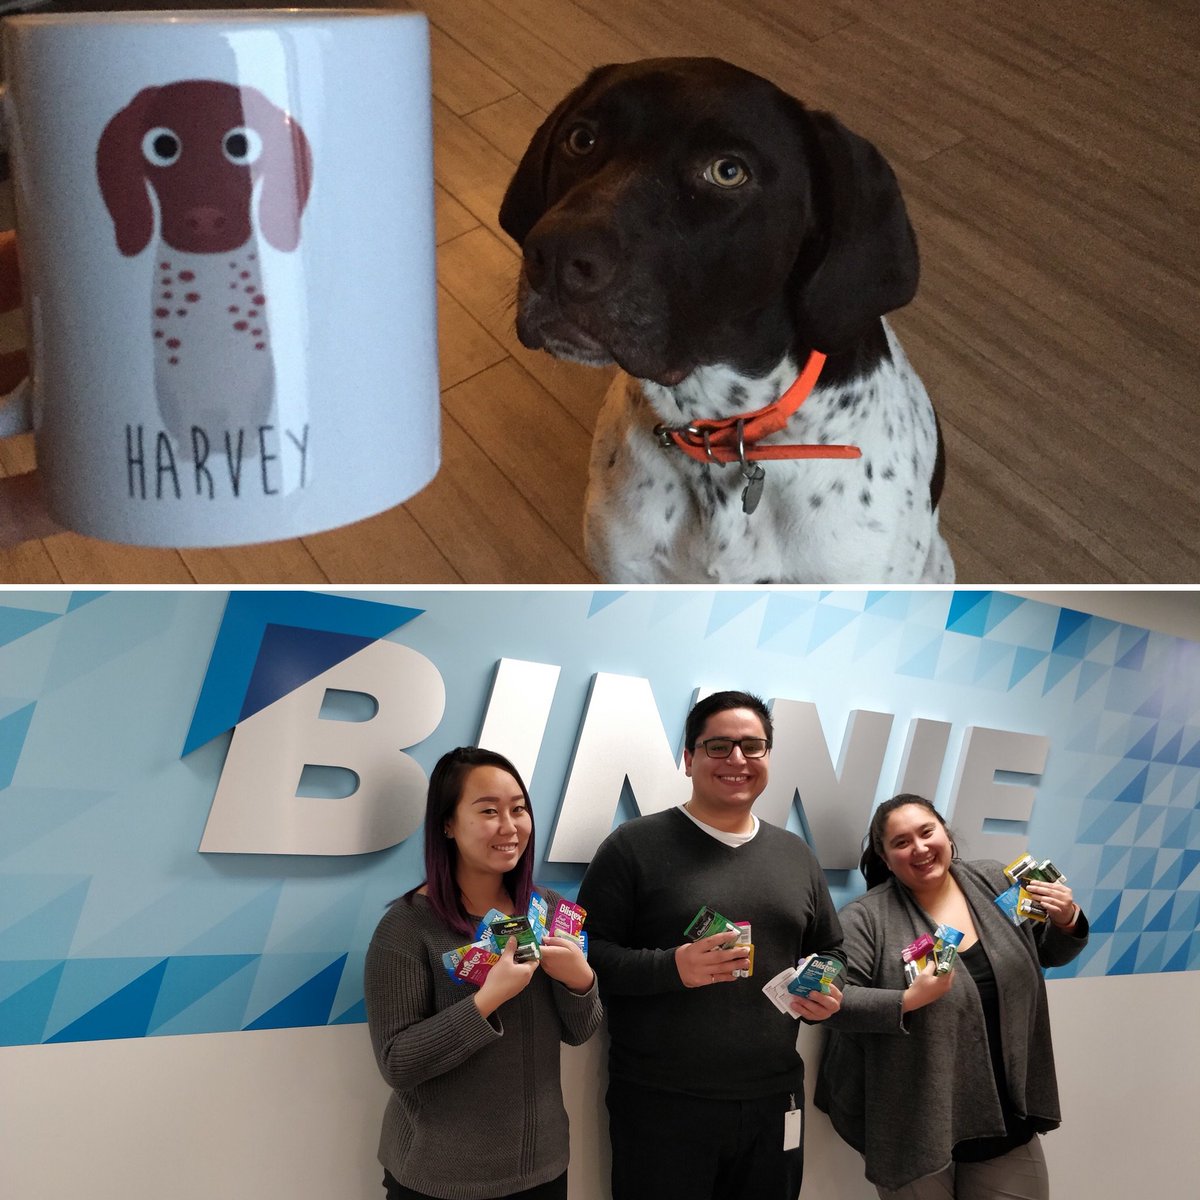 Today our YP Chair, Michael Carreira is taking over our #Instagram page. Head to our feed and find out what's like to be a Binnie a highway design engineer (and proud #dog owner). #youngprofessionals #highwaydesign #BinnieYPs #harveythegsp